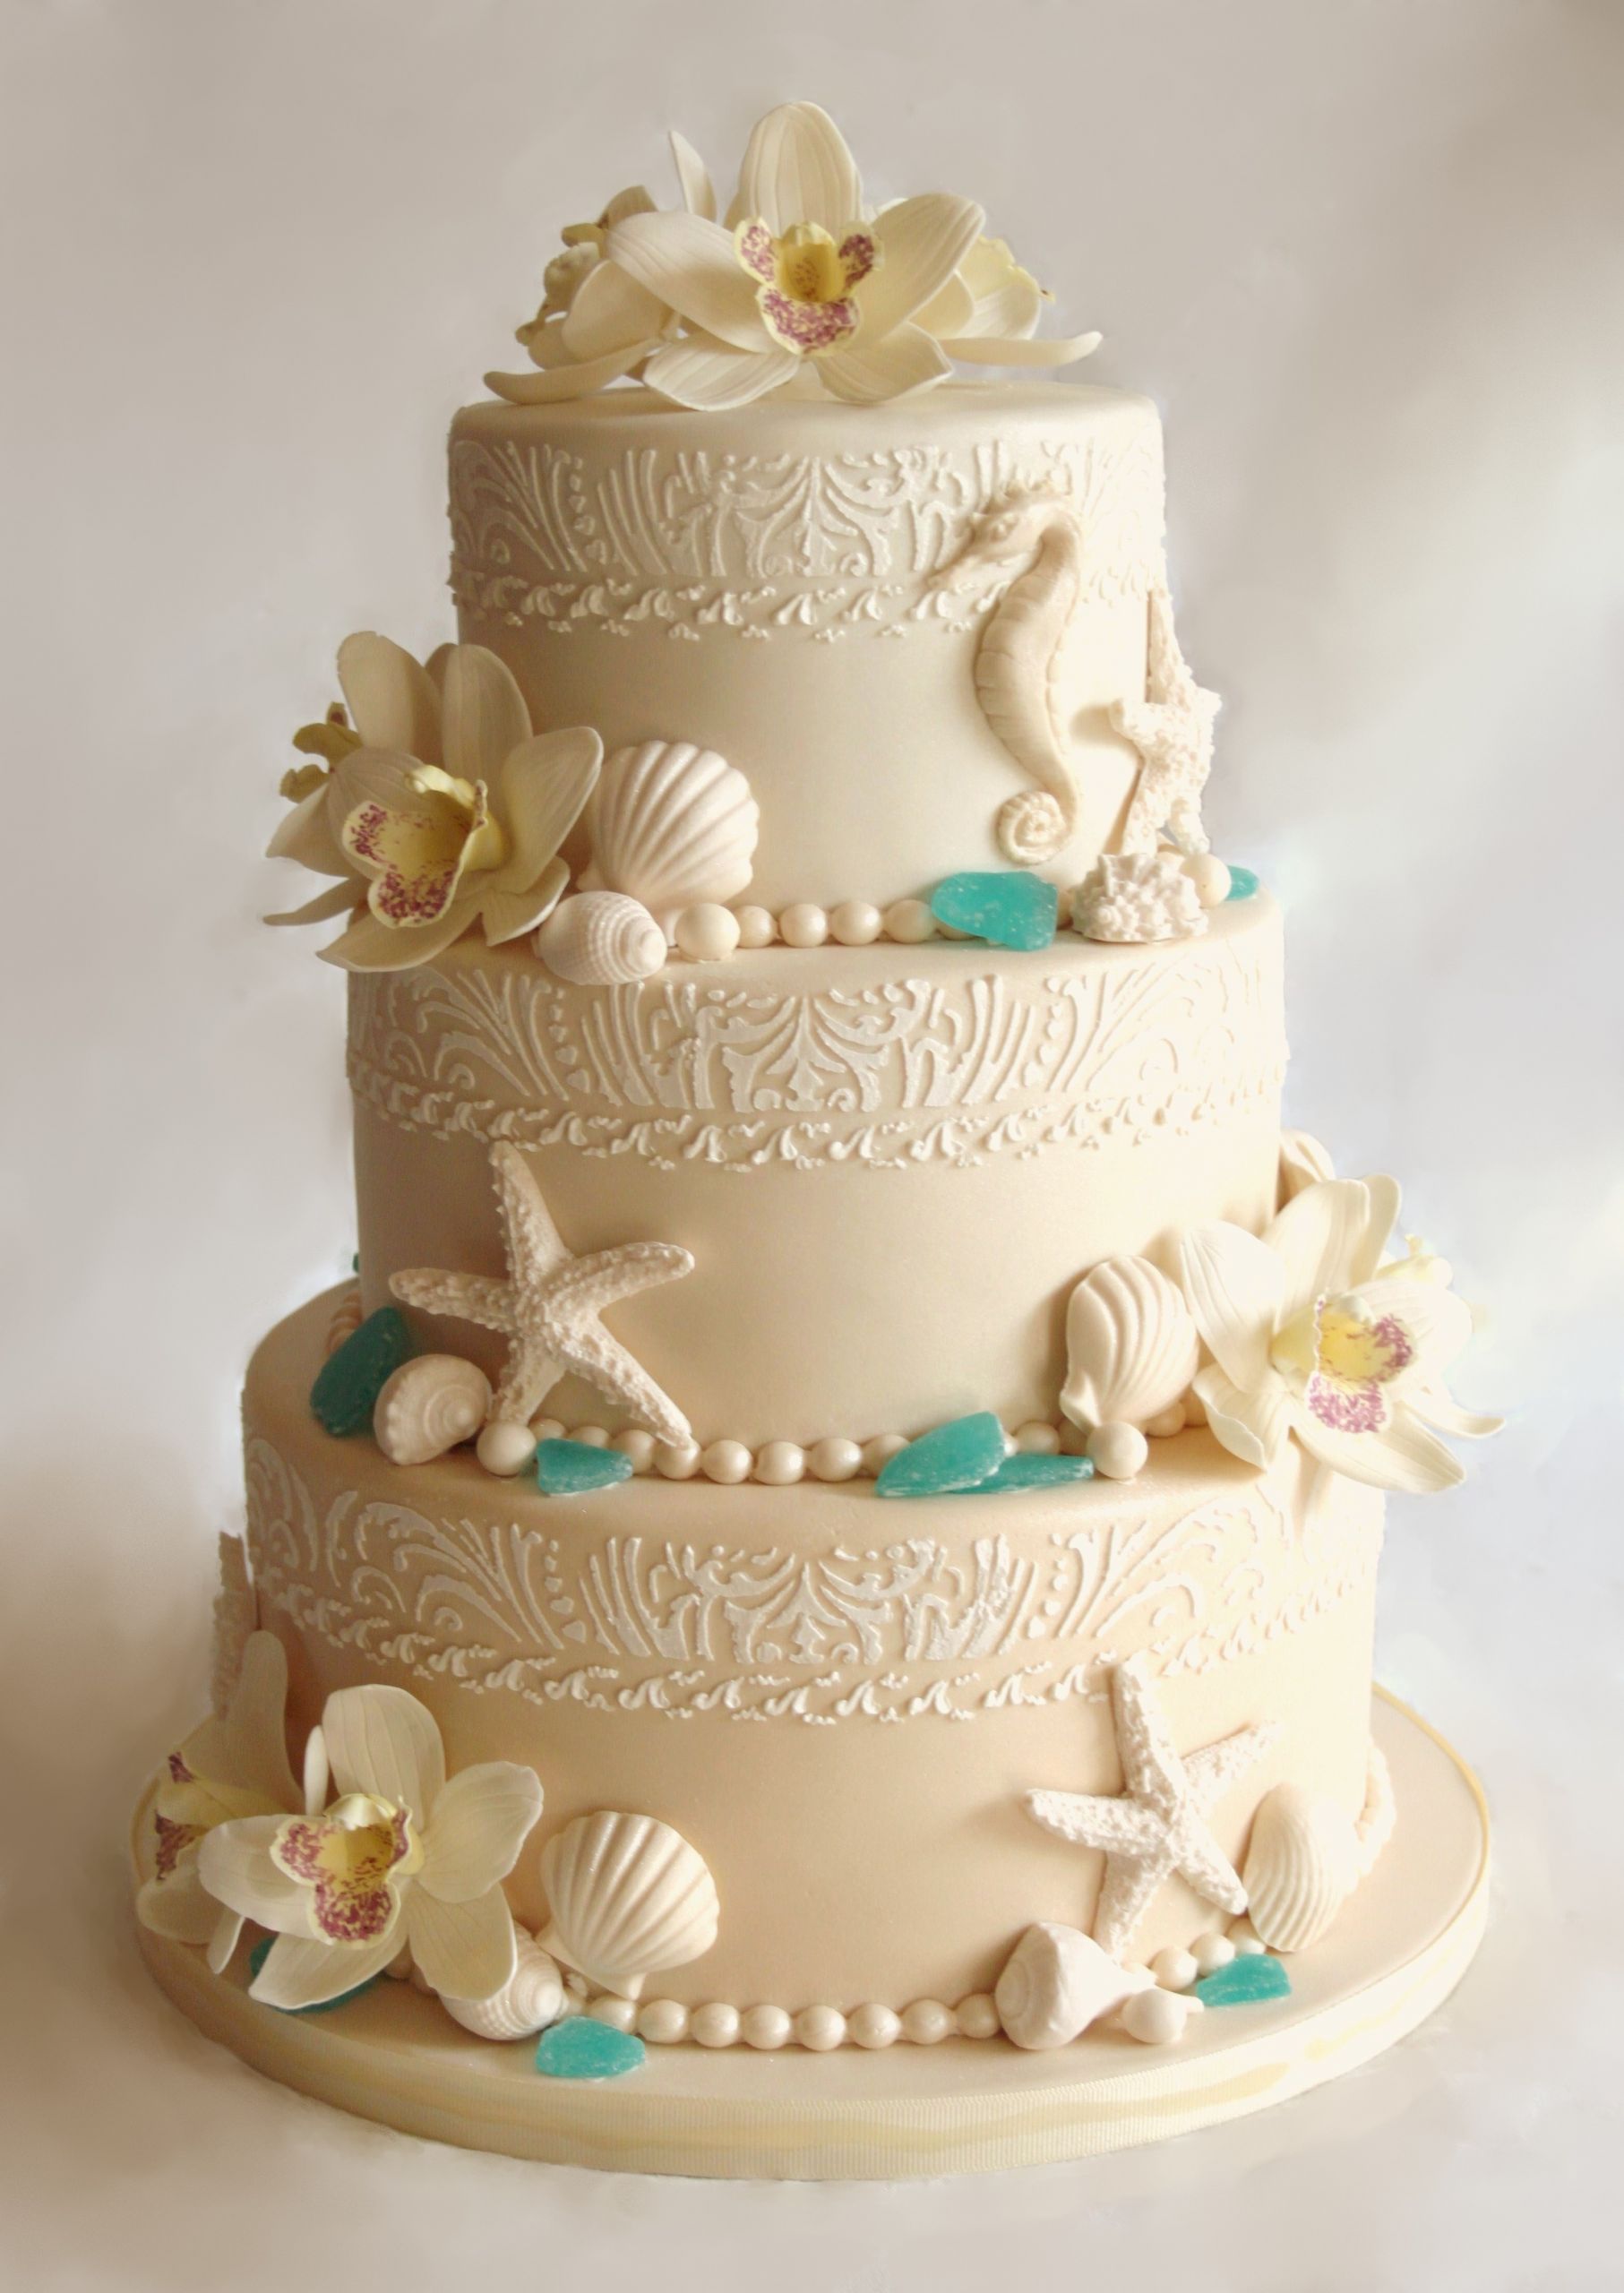 Beach Theme Wedding Cakes
 30 ULTIMATE WEDDING CAKES TO STEAL THE SHOW